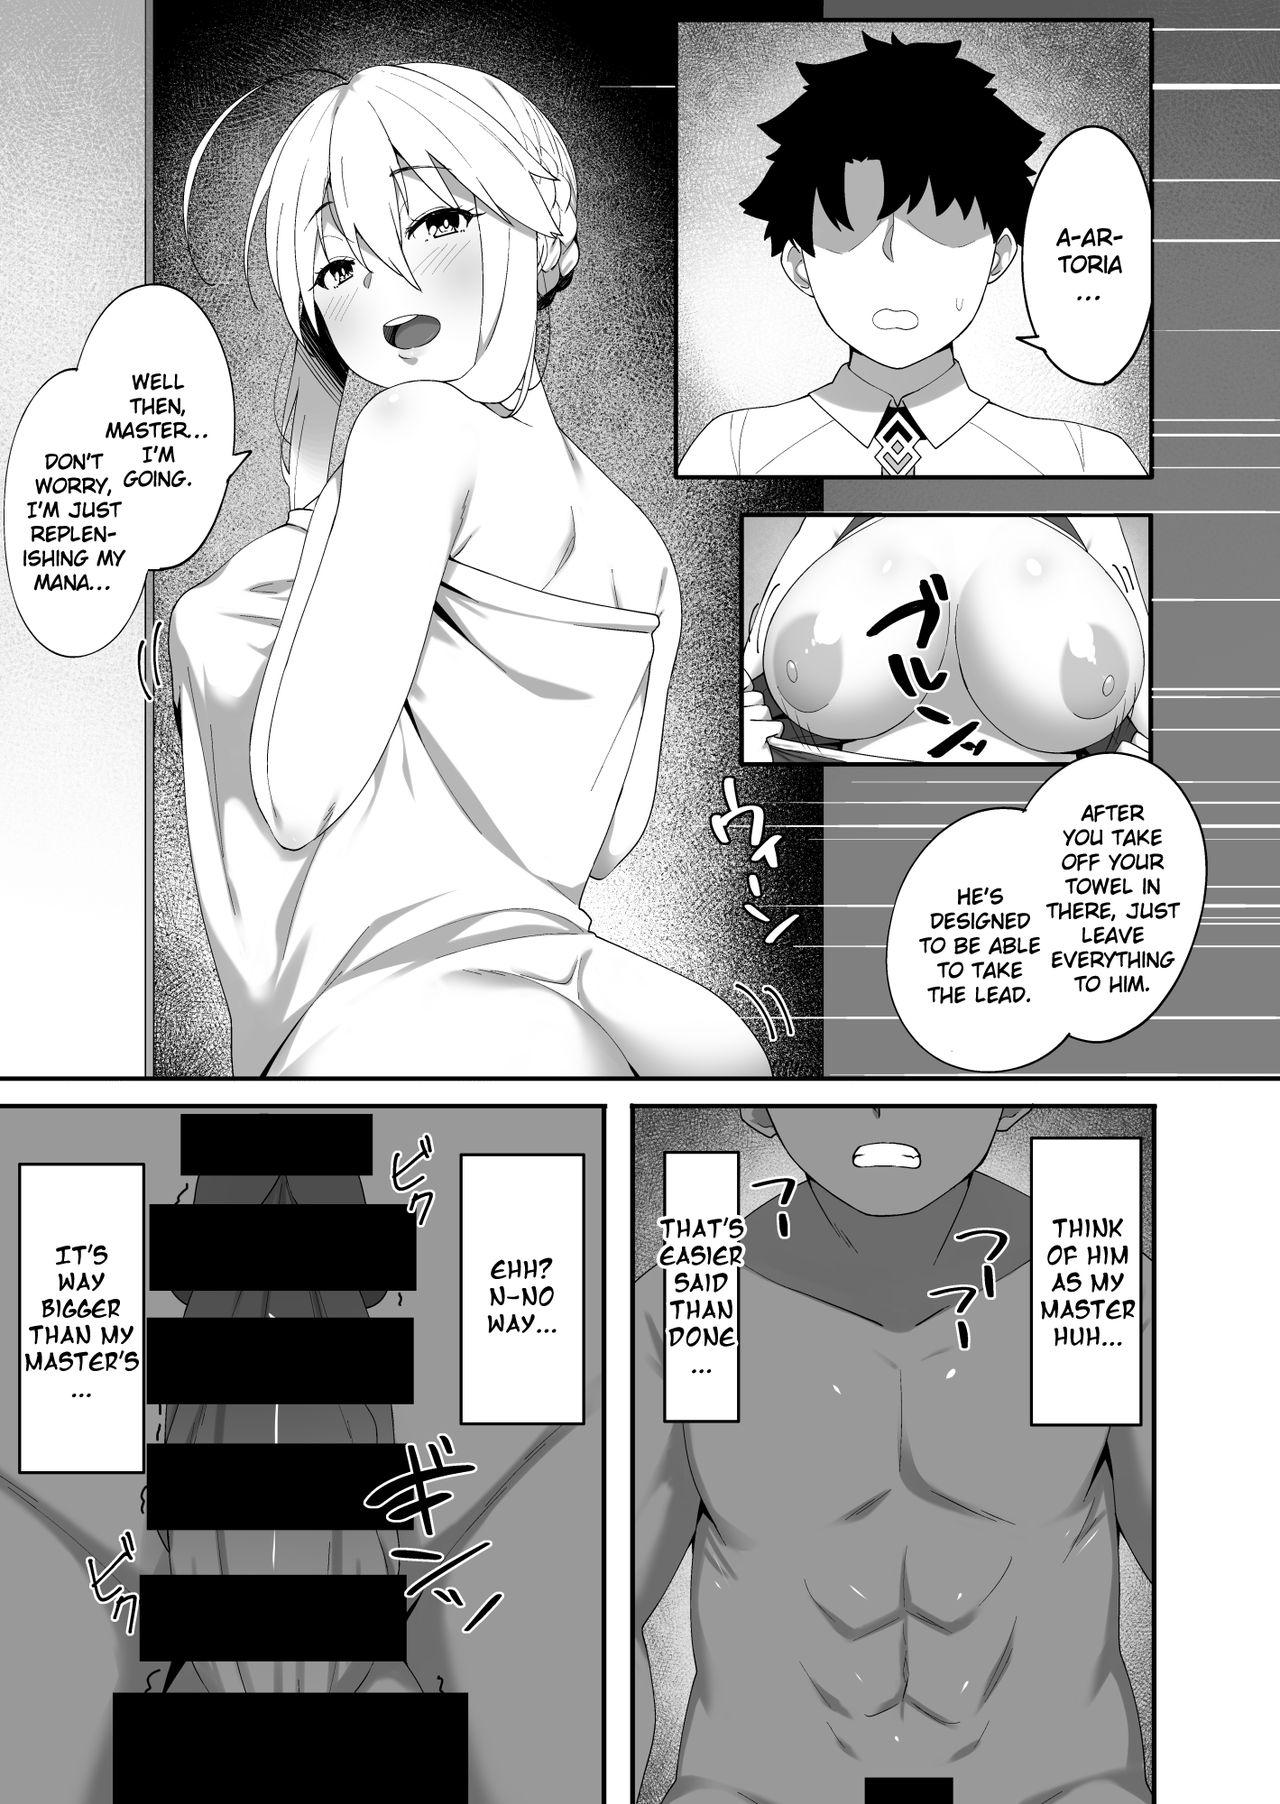 Peituda Kabe no Mukou de Kimi ga Naku 2 | Crying Out From The Other Side Of The Wall 2 - Fate grand order And - Page 4